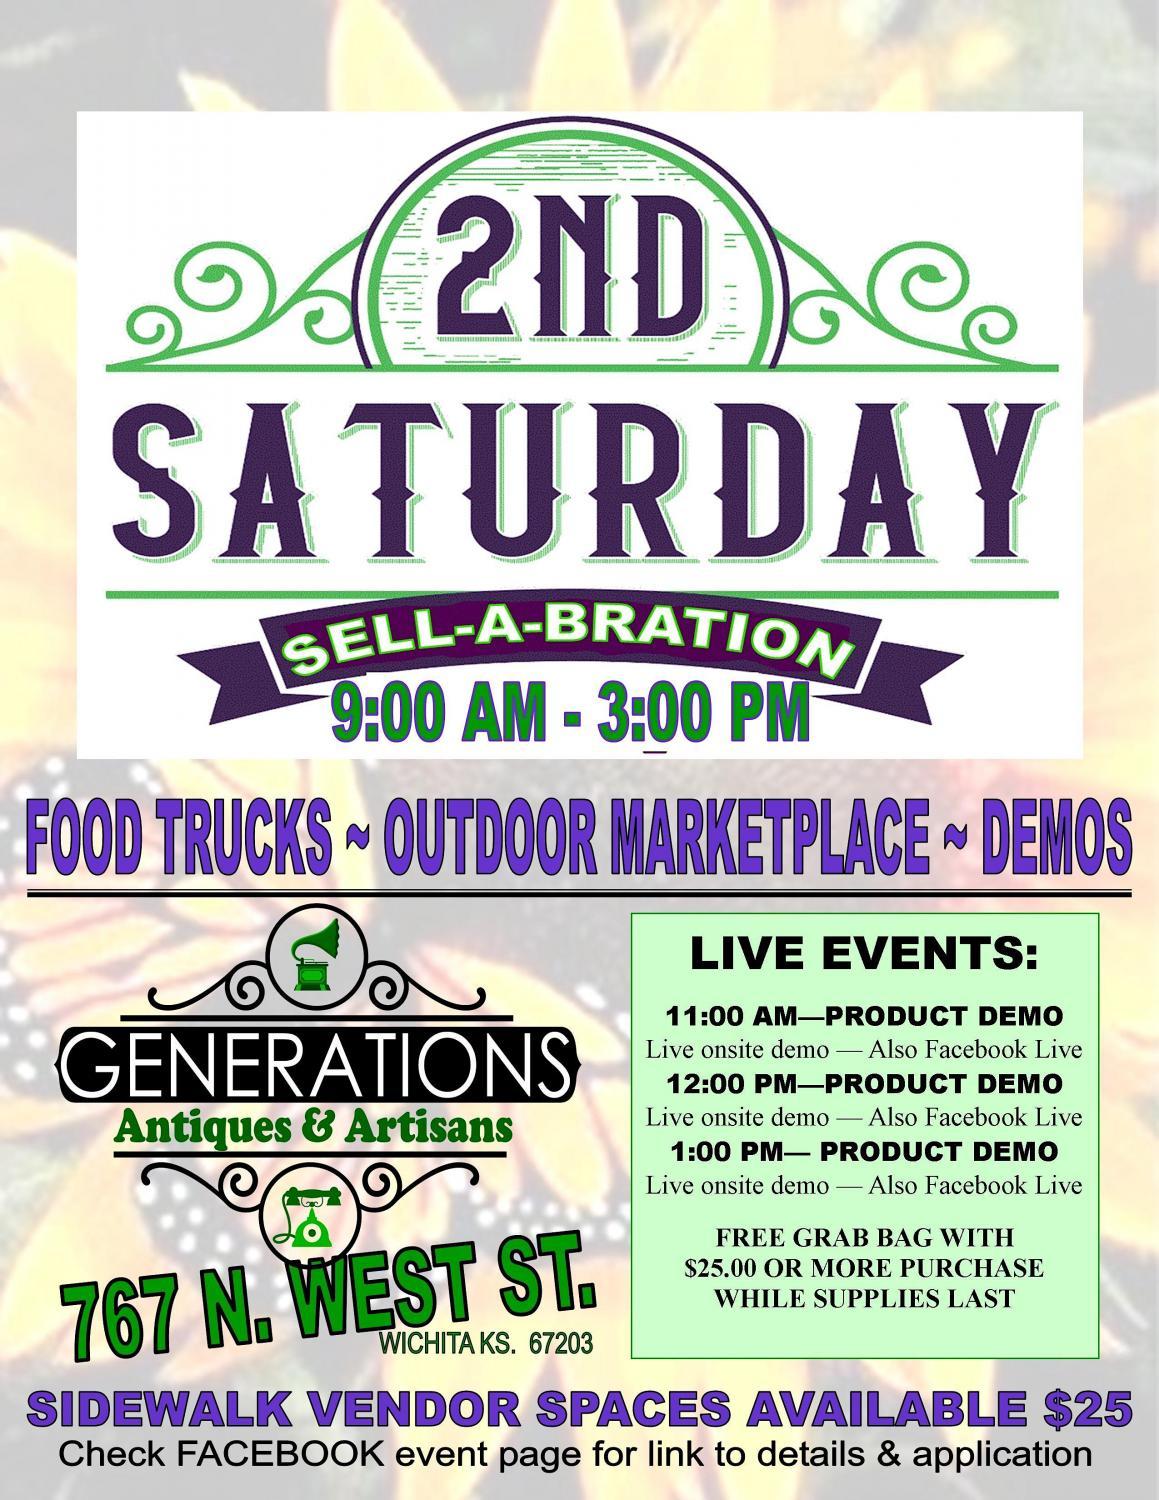 2ND SATURDAY ~ SELL-A-BRATION ~ OUTDOOR MARKETPLACE ~ FOOD TRUCKS
Sat Feb 11, 9:00 AM - Sat Feb 11, 3:00 PM
in 114 days